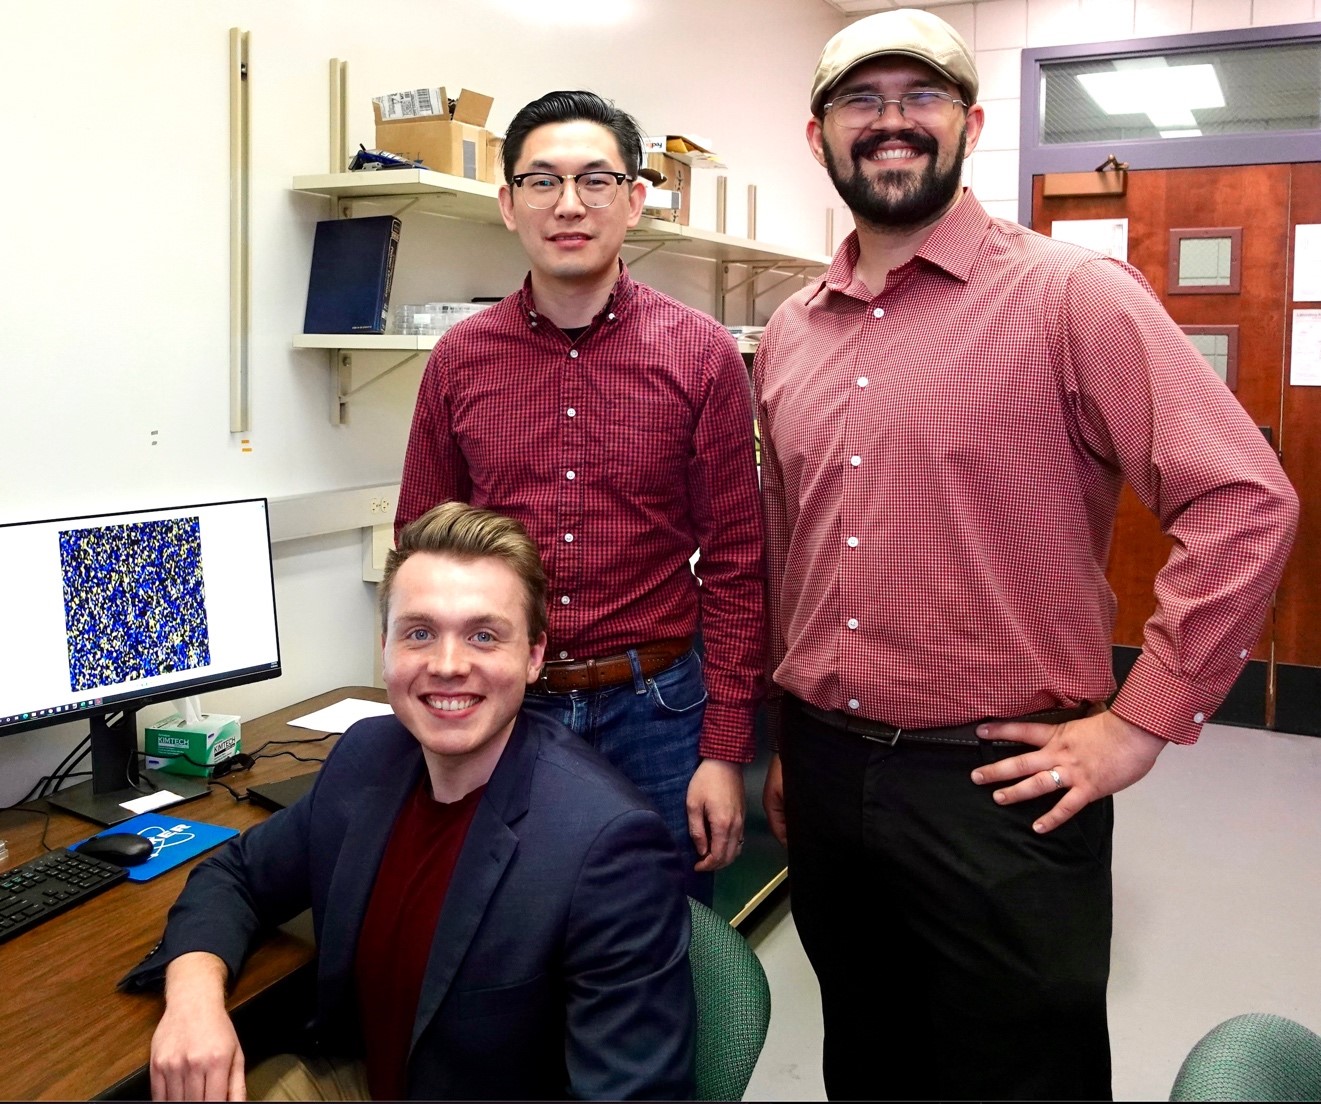 Pictured left to right: Nathaniel Prine (seated), Dr. Xiaodan Gu, and Luke Galuska.